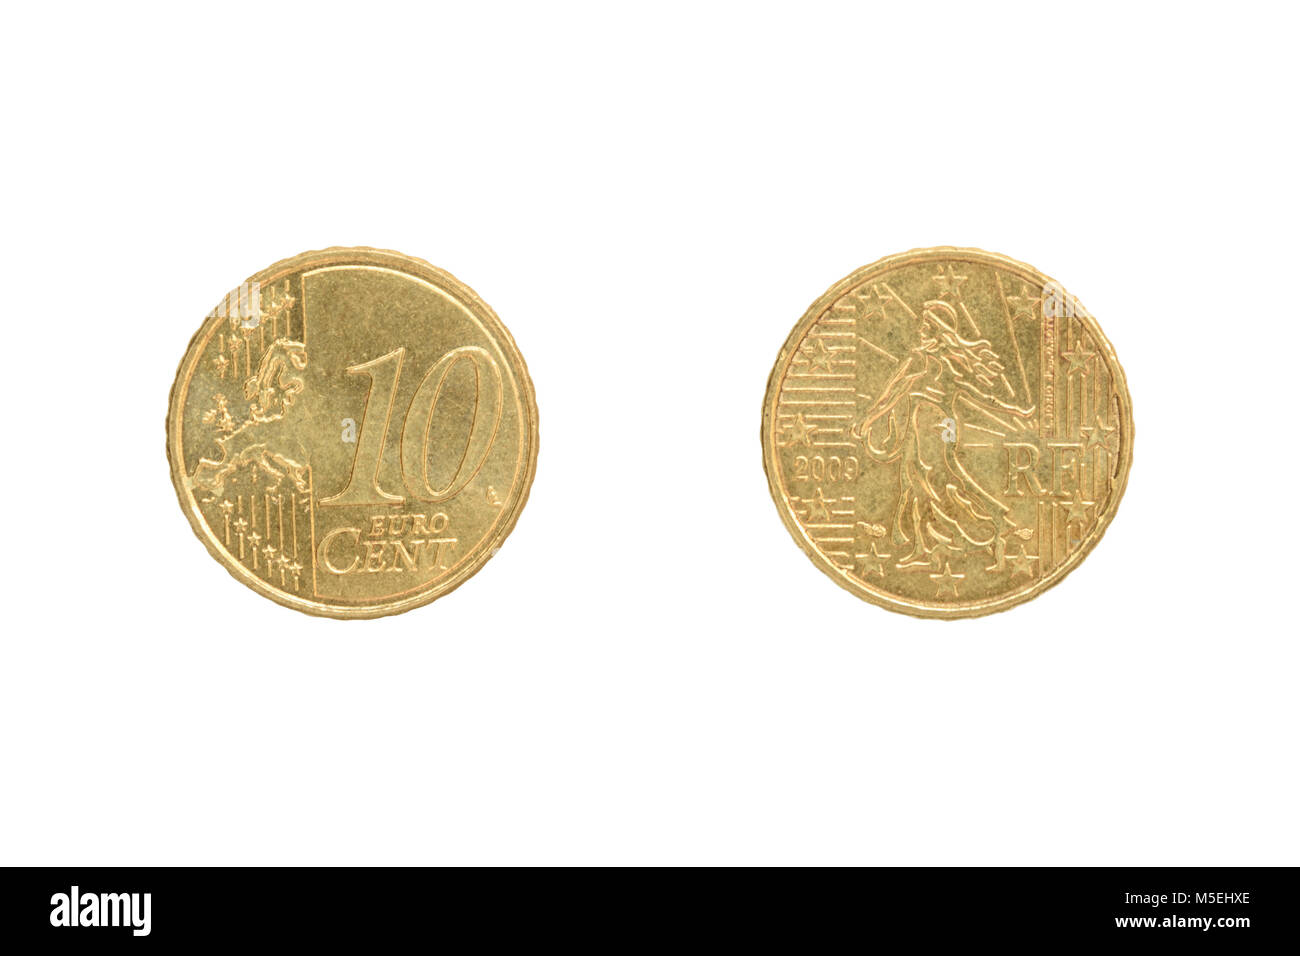 Euro coins in pictures - National sides, 10 cent